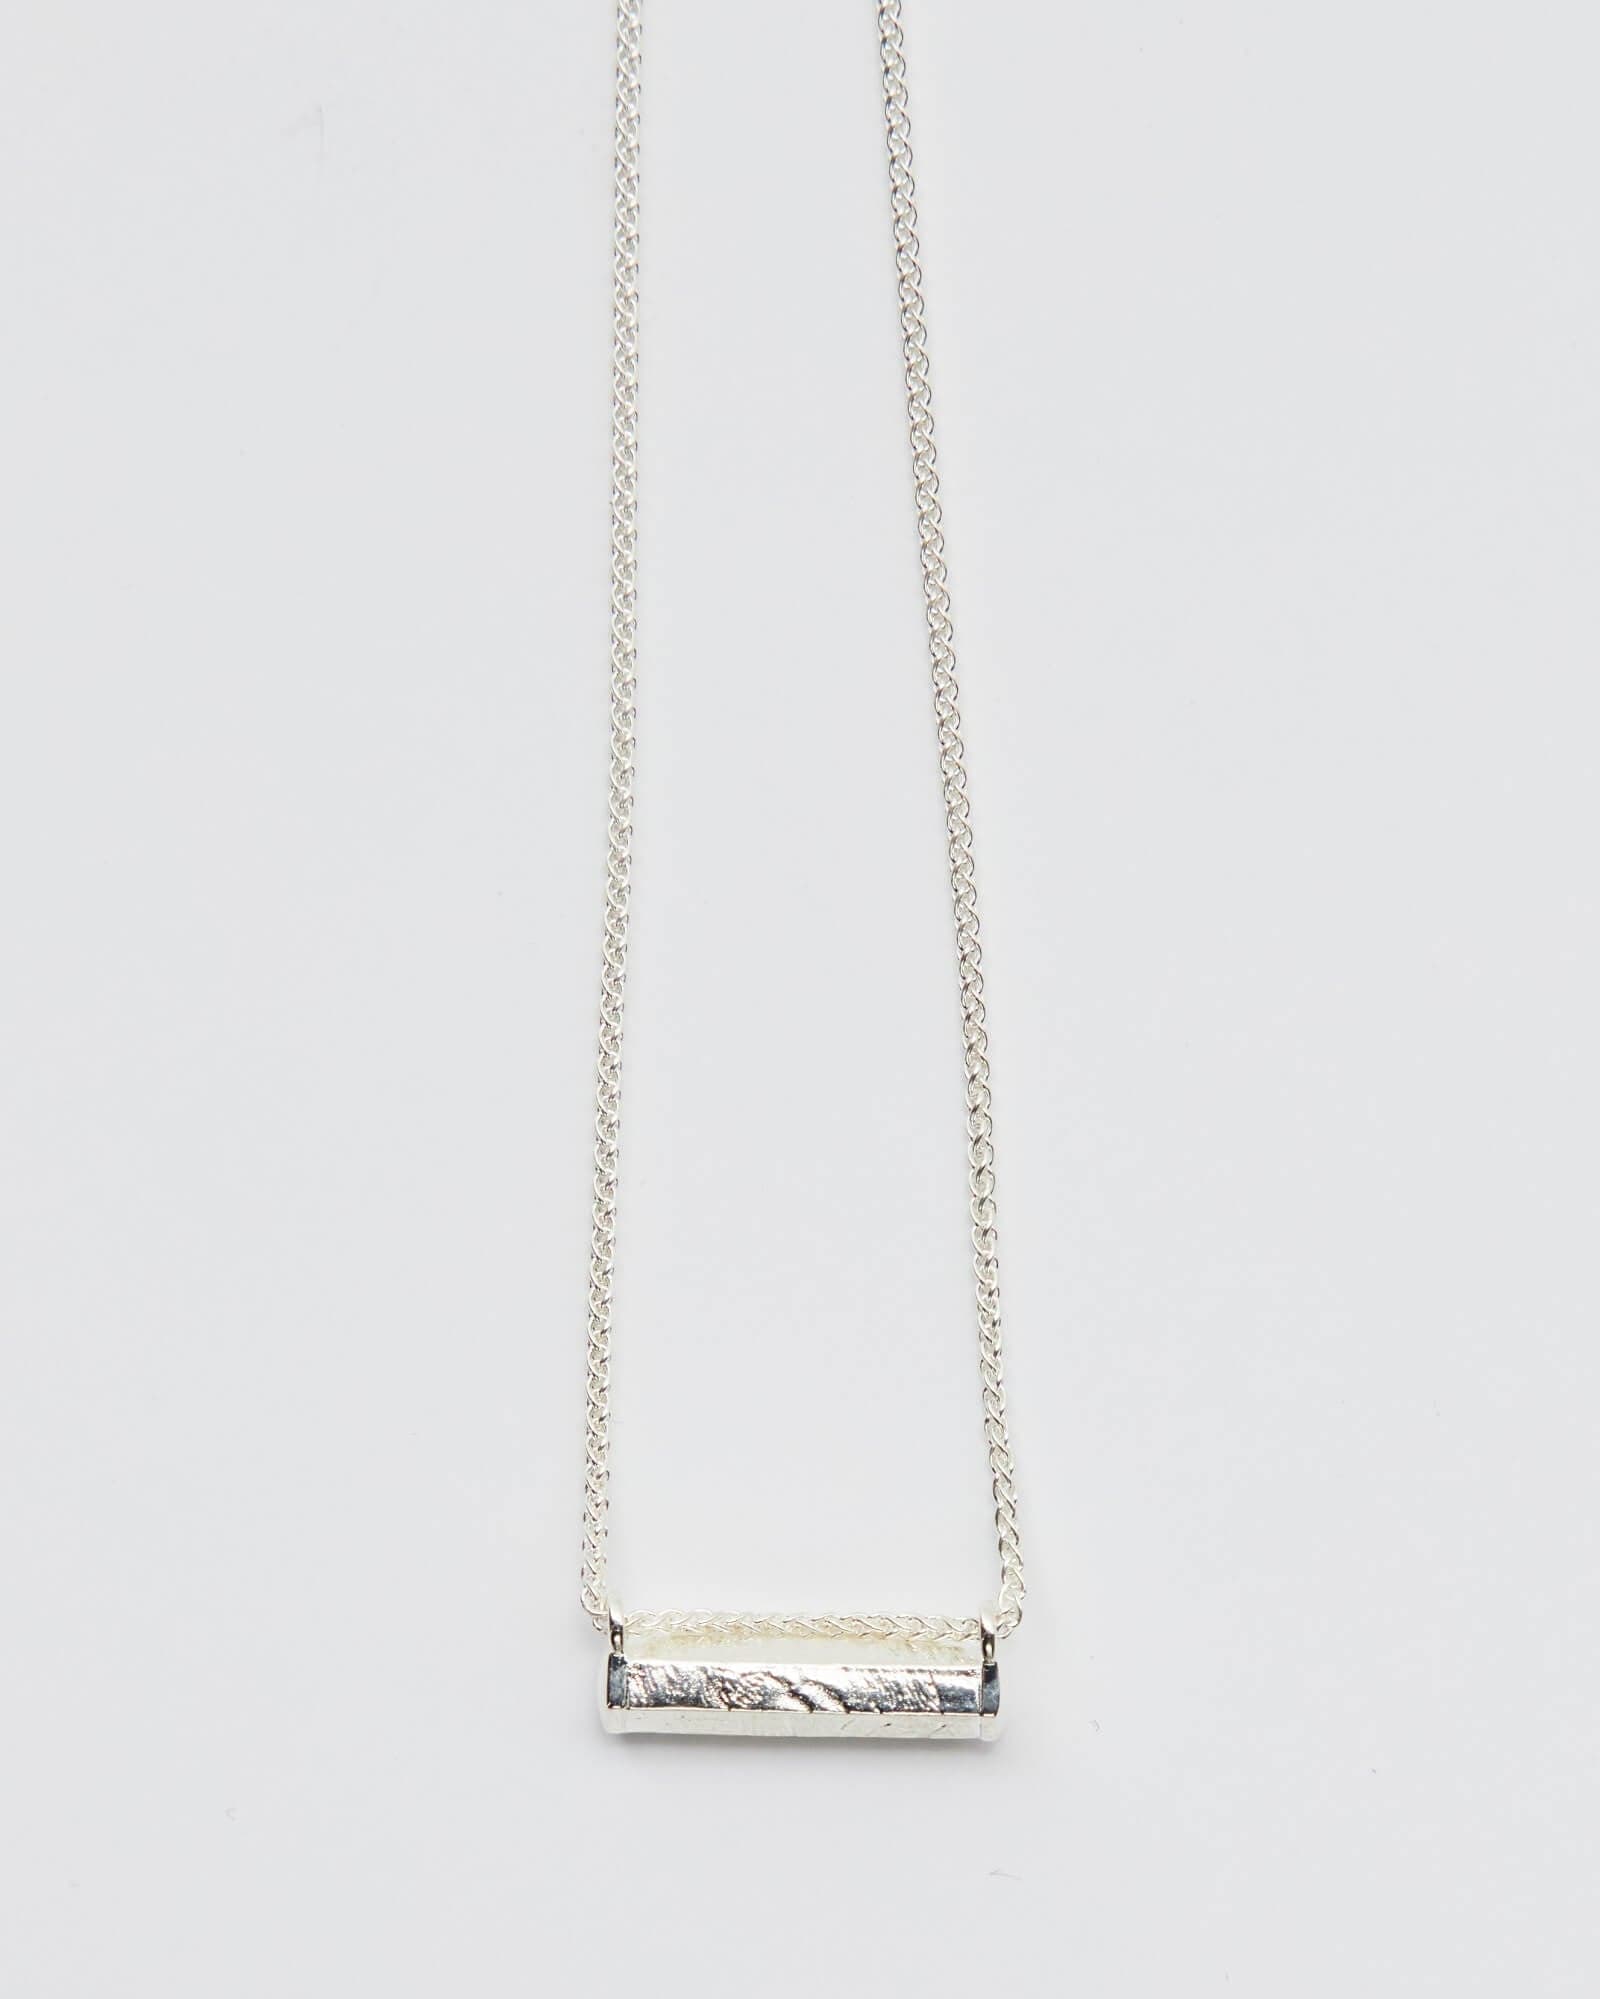  A stunning silver necklace on its own, featuring a delicate chain and a beautifully crafted pendant. The silver necklace adds a touch of elegance and sophistication to any outfit, making it the perfect accessory for any occasion